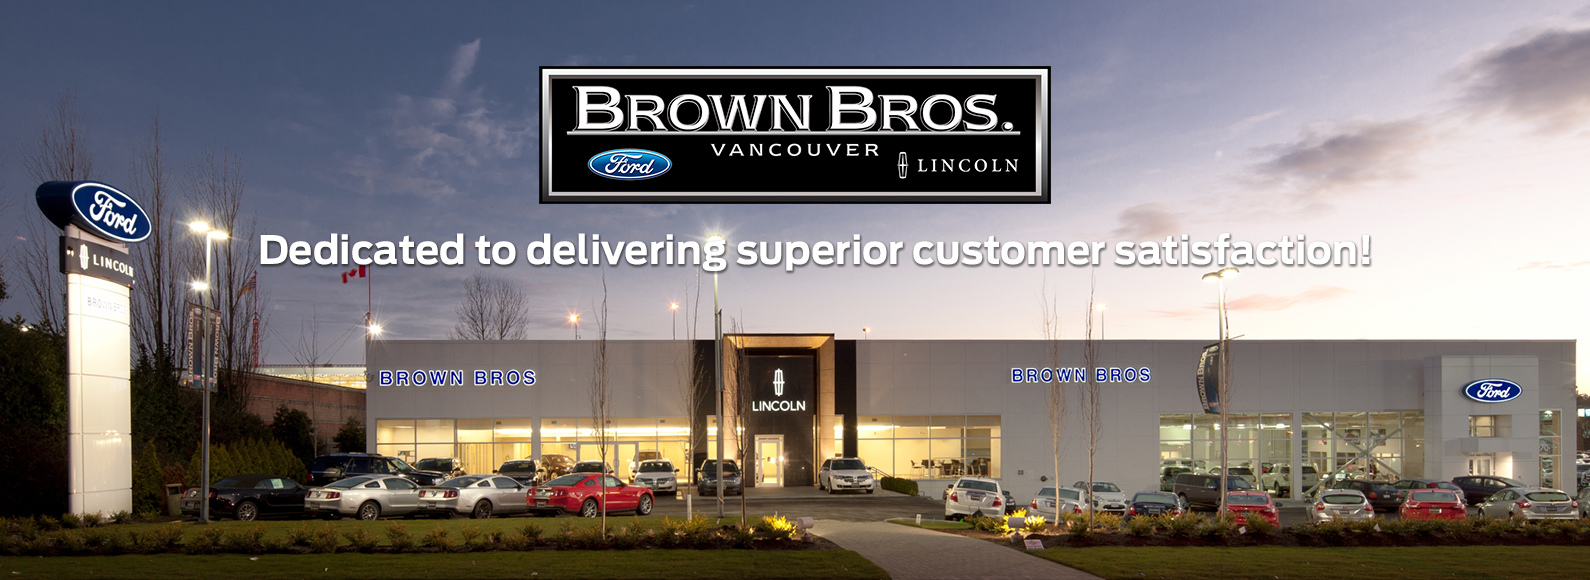 Brown bros ford used inventory #5